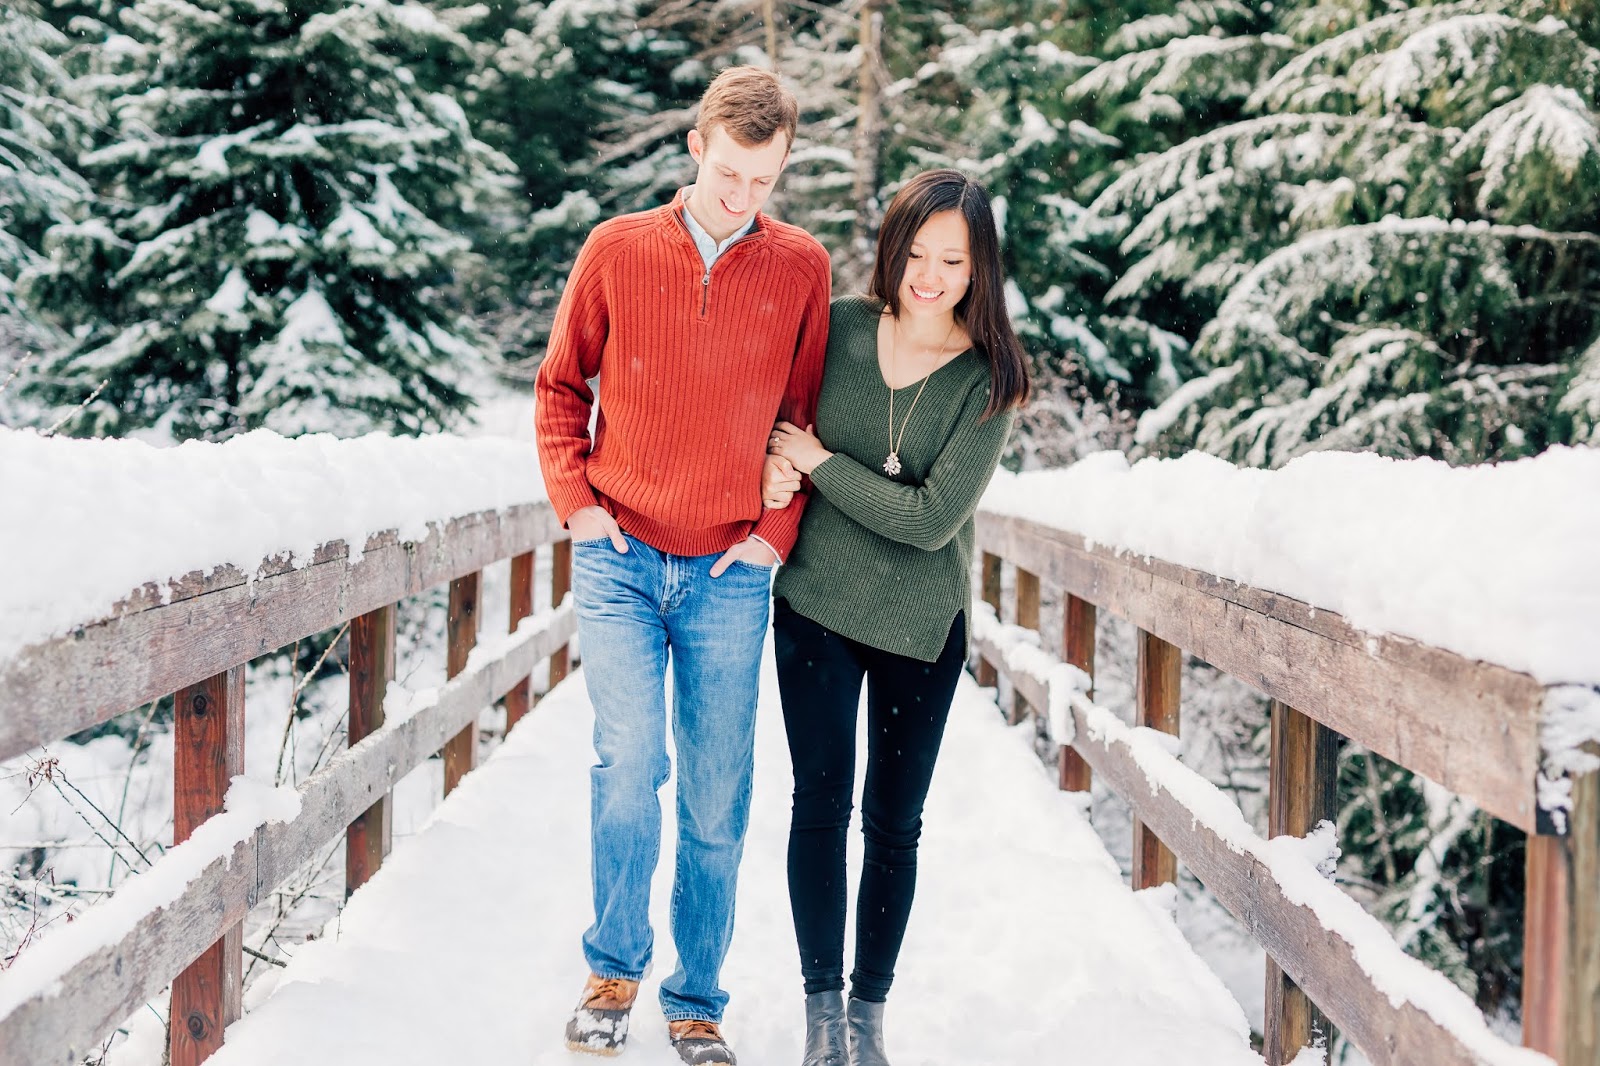 Snowy Engagement-Crystal Mountain Photographers-Something Minted Photography